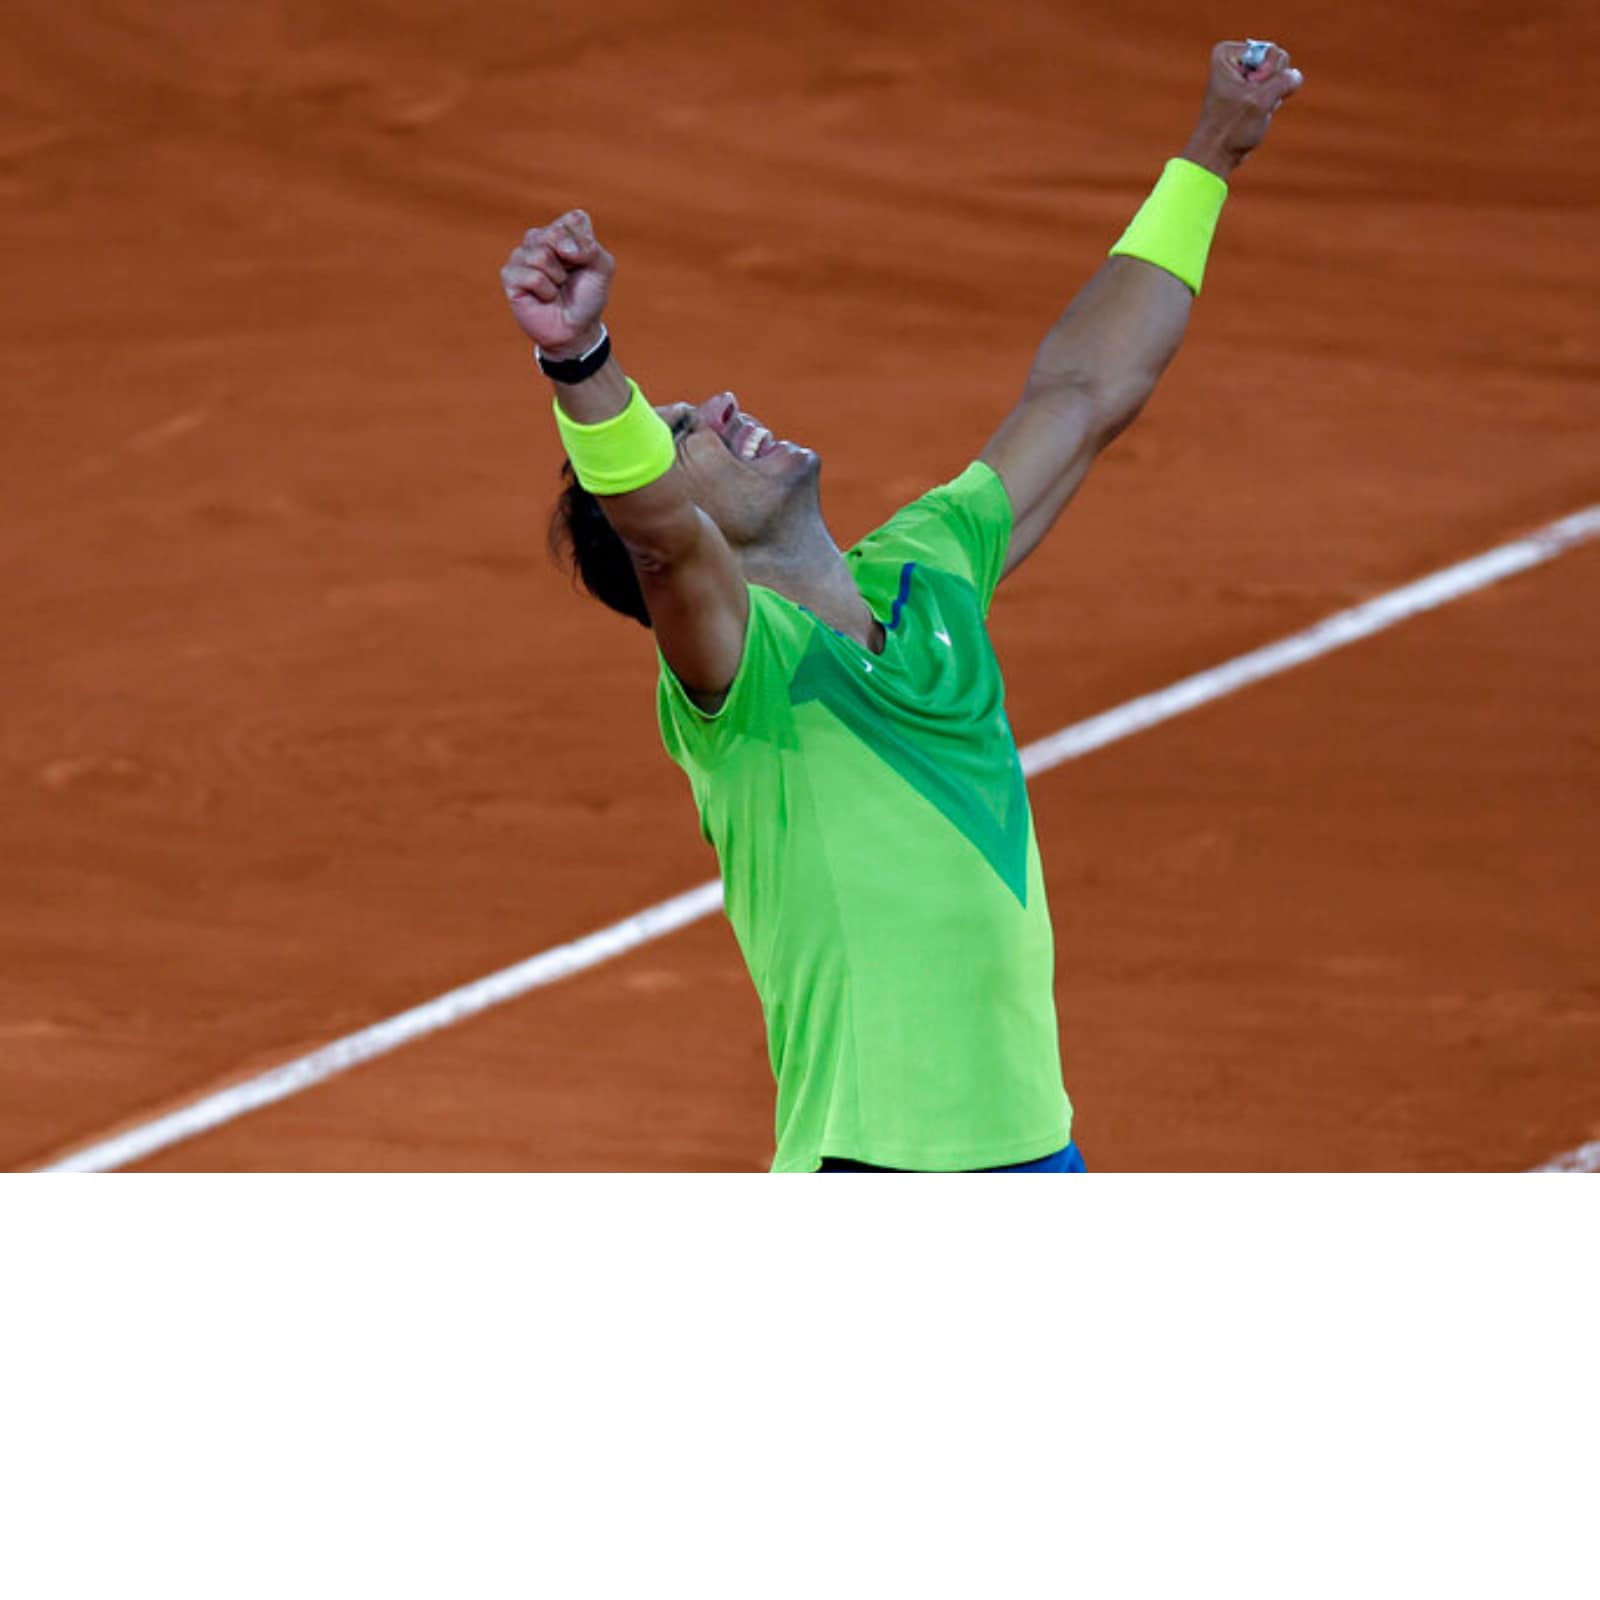 French Open Rafael Nadal Has Another Mountain to Climb against Alexander Zverev